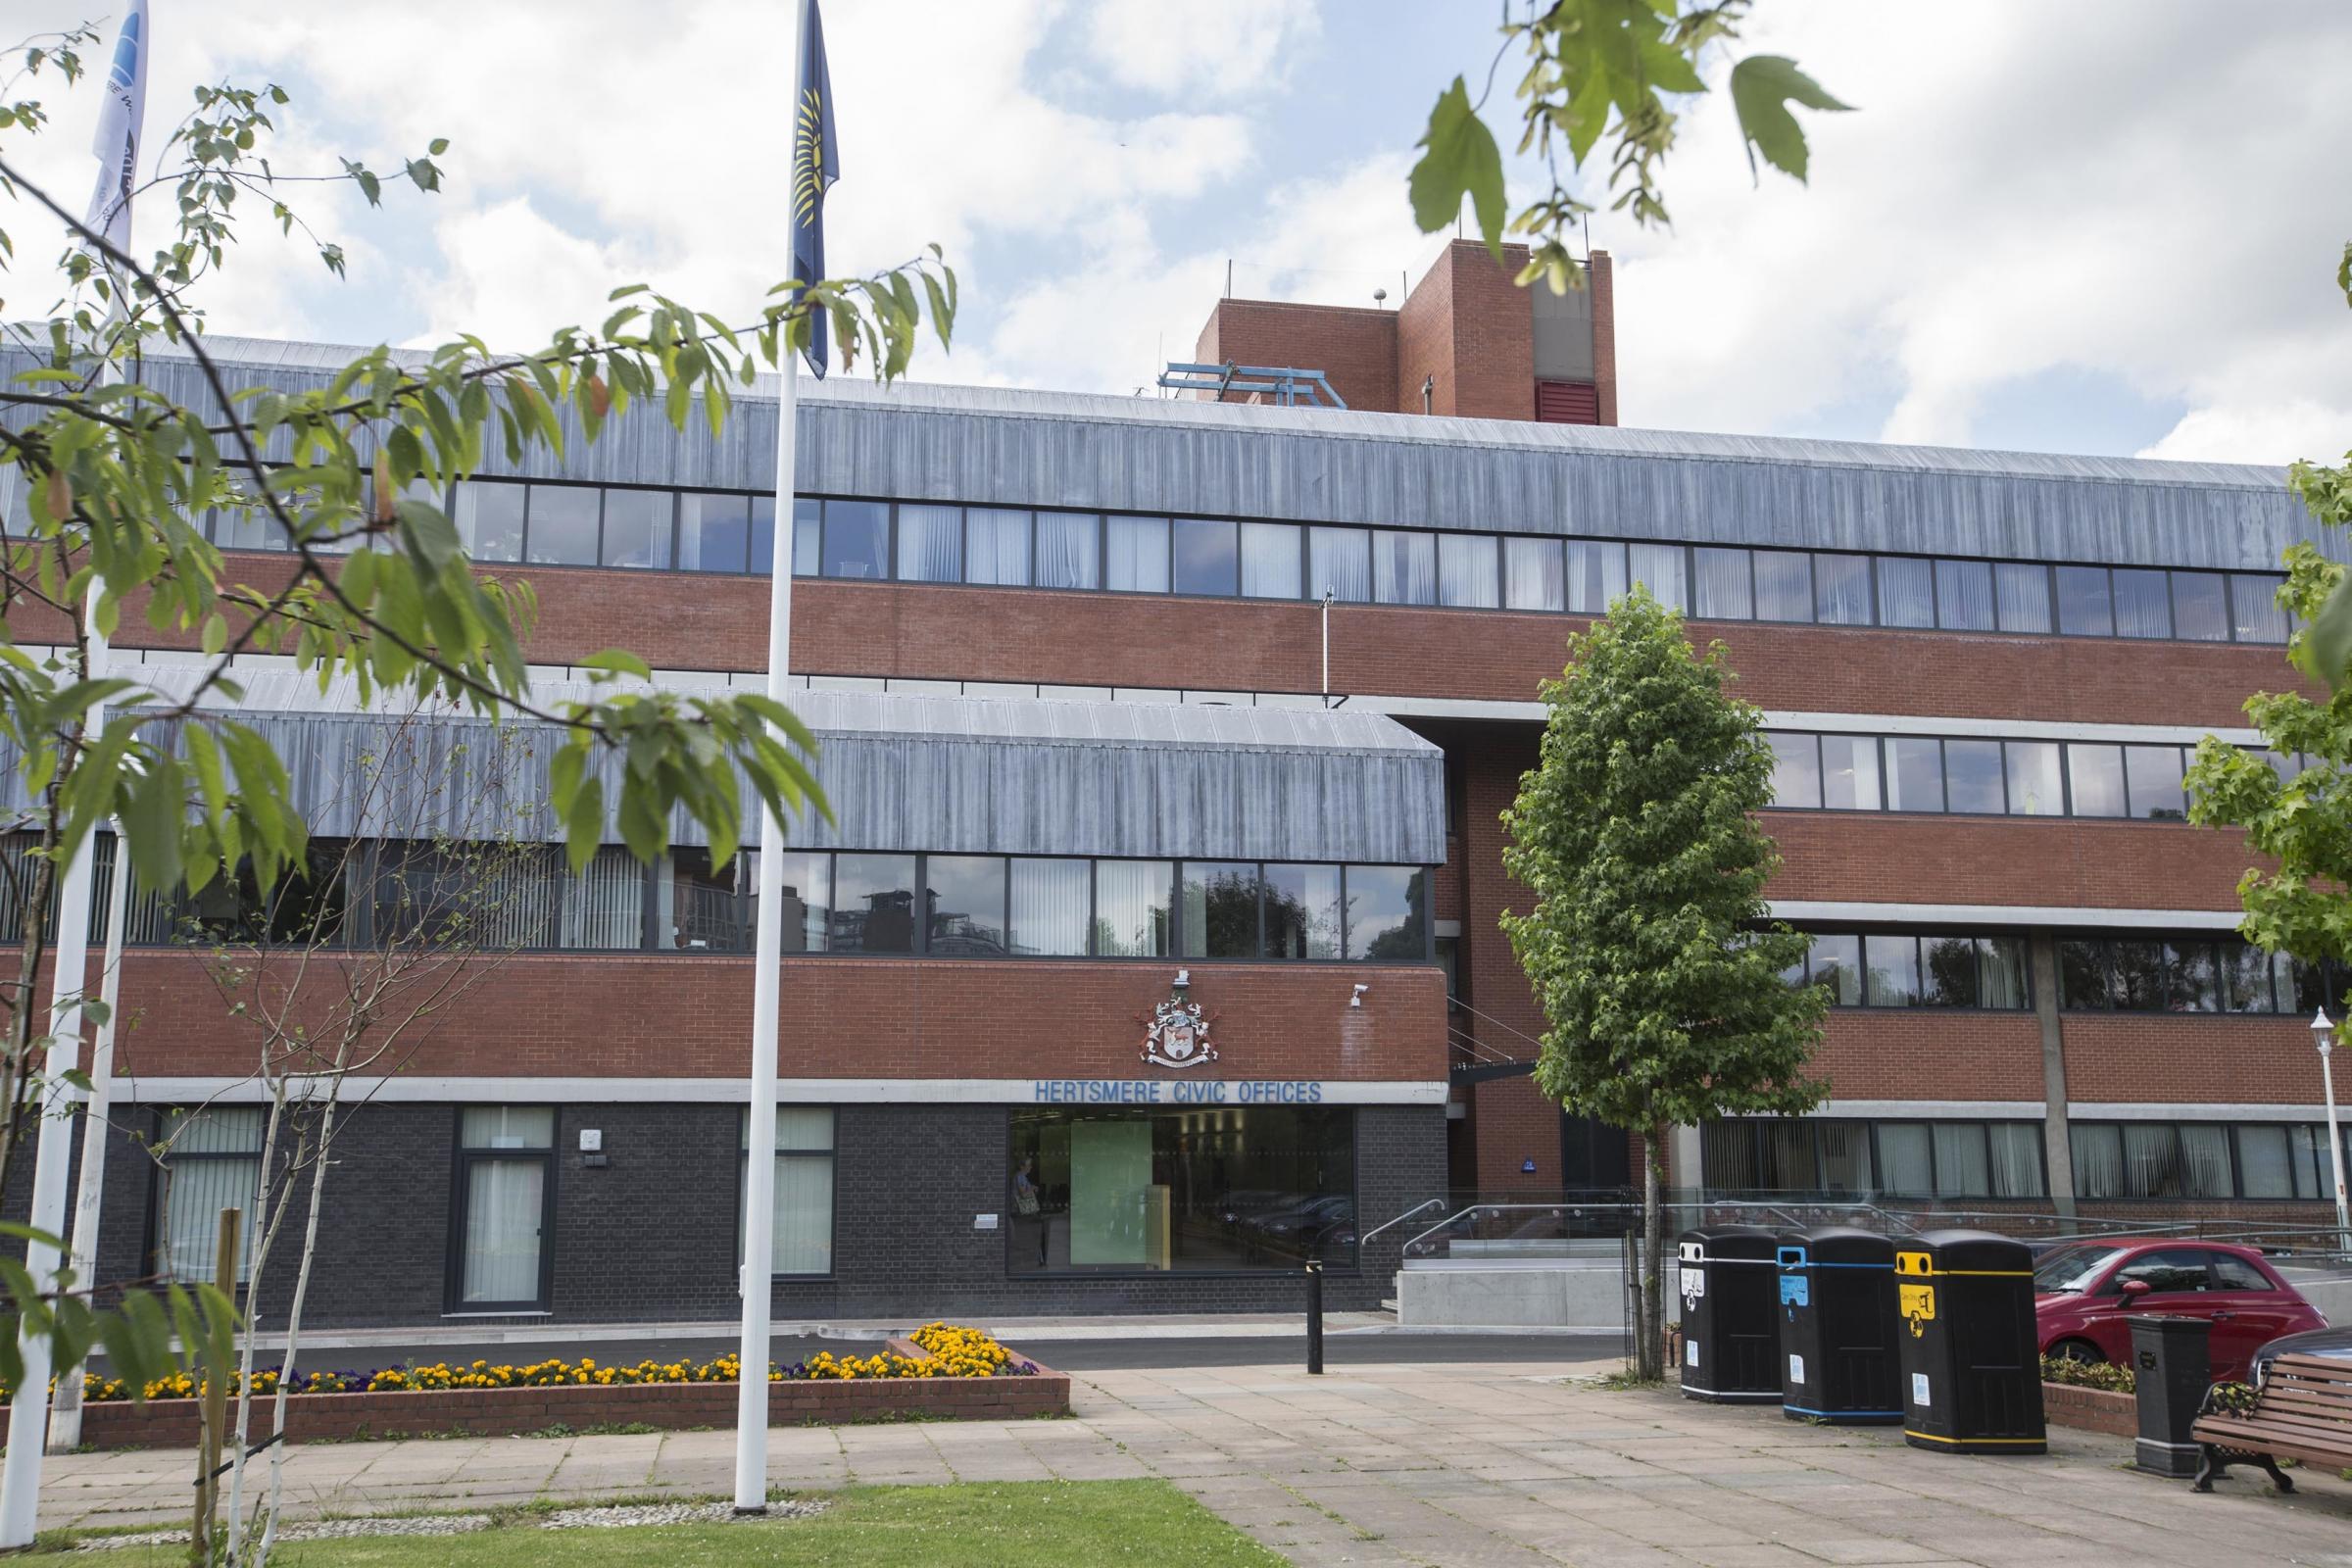 Hertsmere Borough Council, offices pictured, is scrutinising every site put forward for its new local plan to determine which sites are suitable for redevelopment